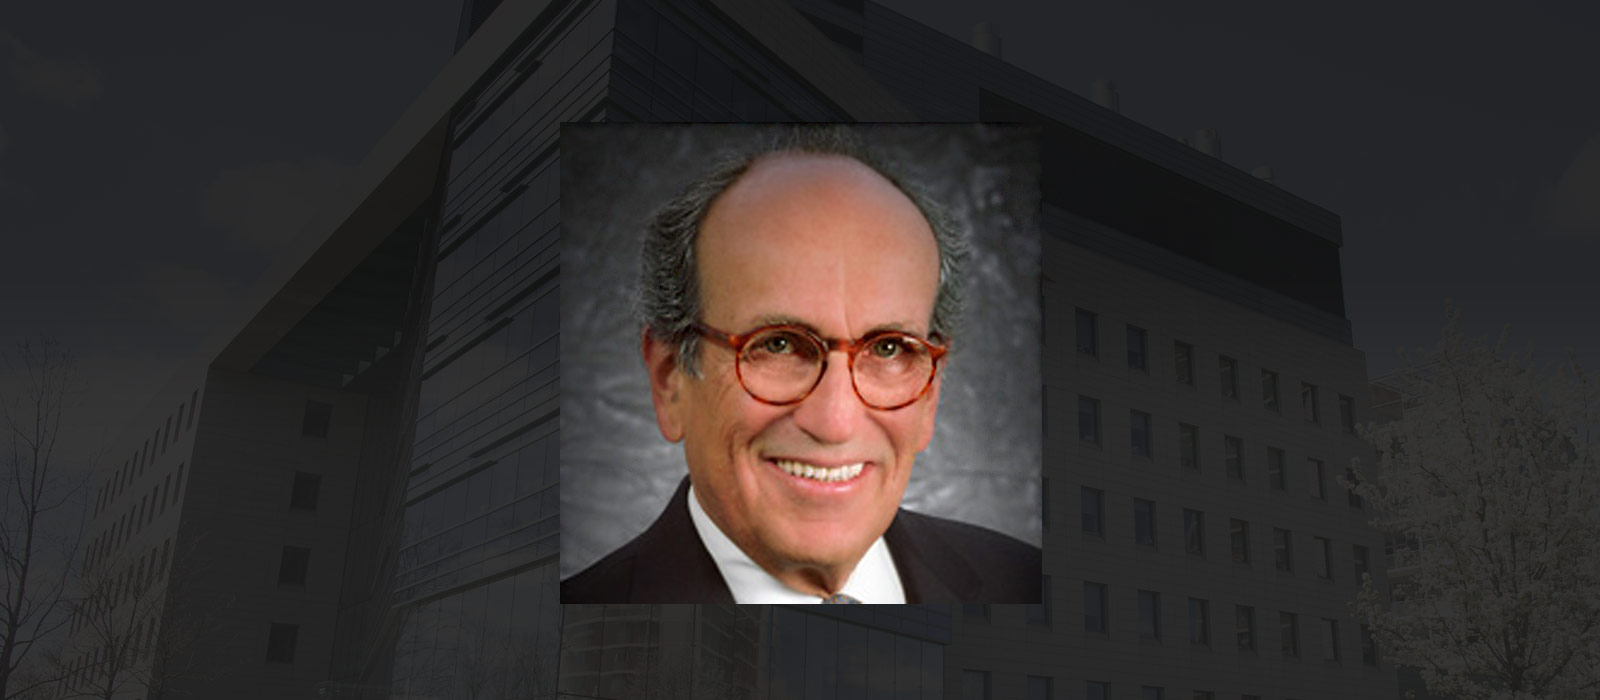 Einstein and Montefiore Mourn the Loss of Burton P. Resnick, Former Board Chair with Deep Family Roots at the College of Medicine